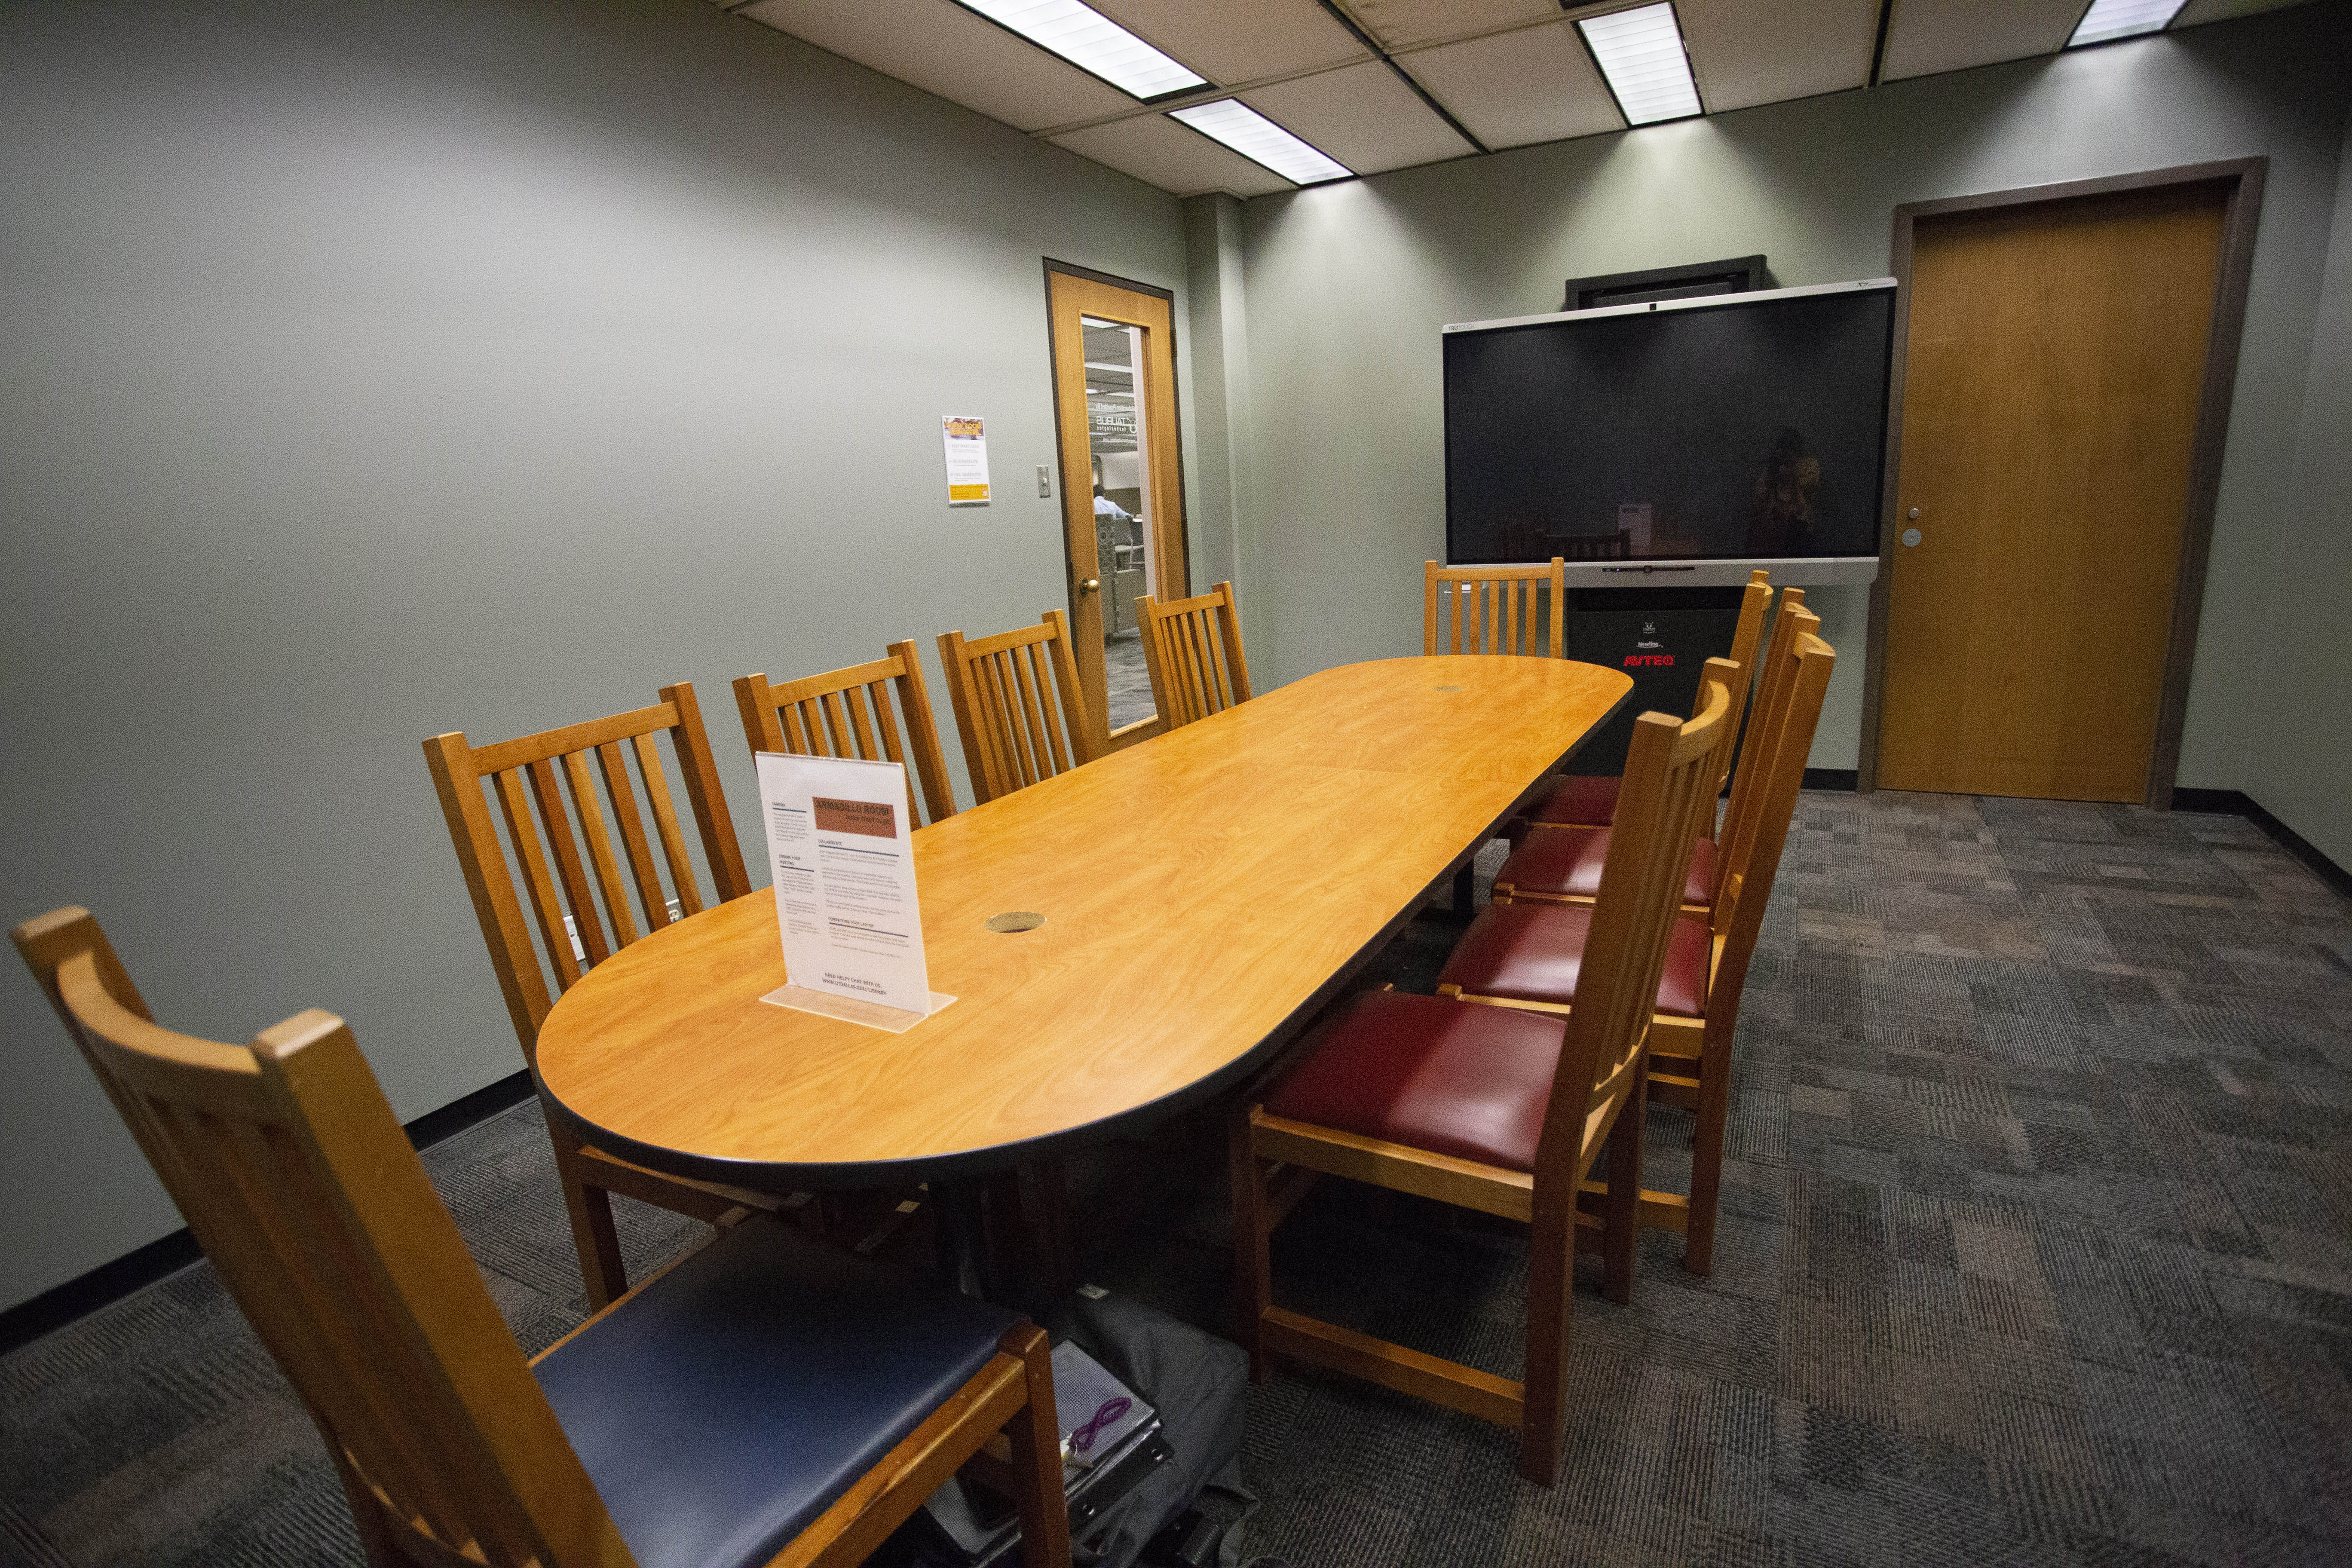 McDermott Library adds smart rooms